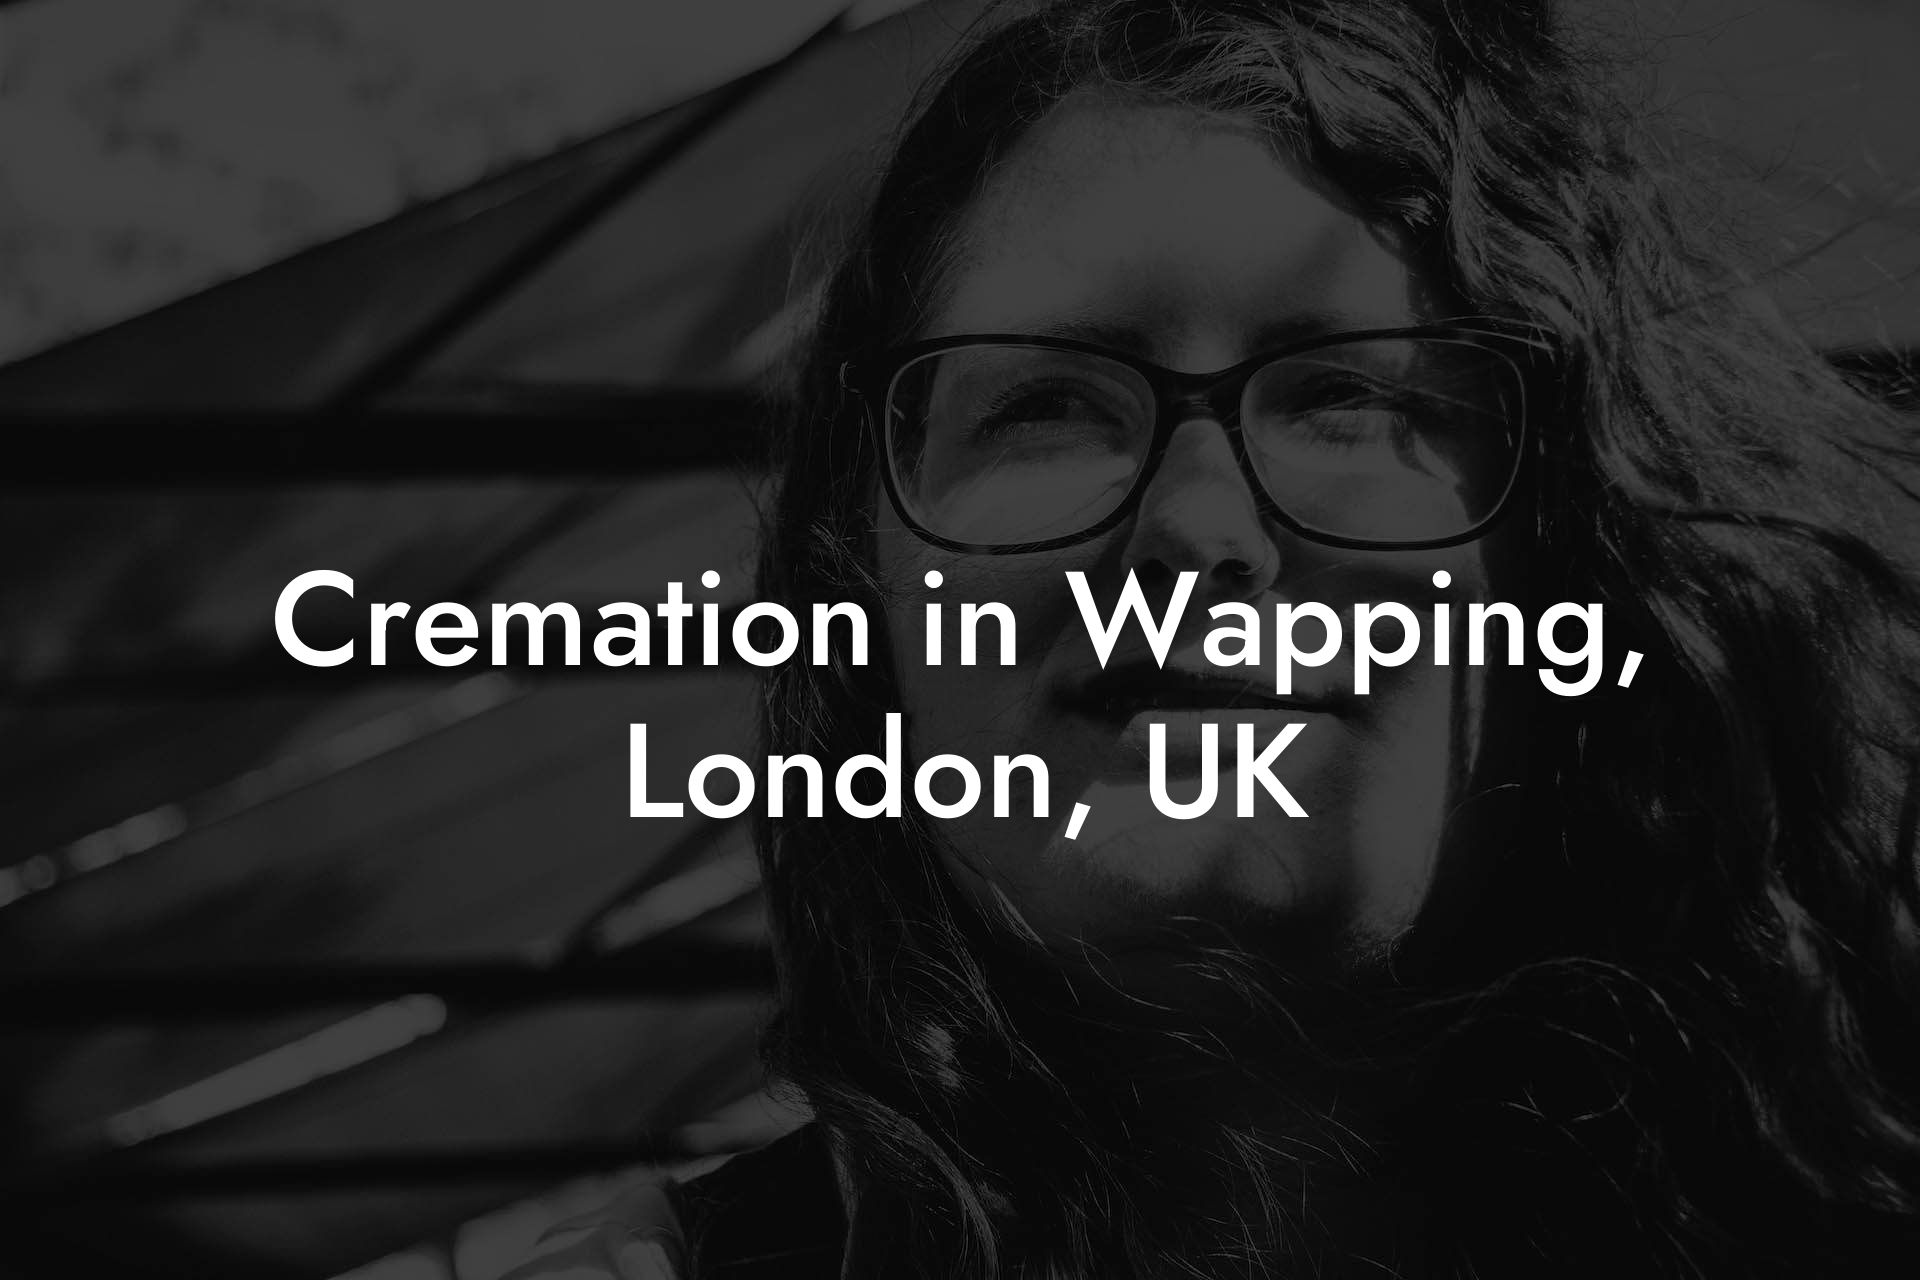 Cremation in Wapping, London, UK